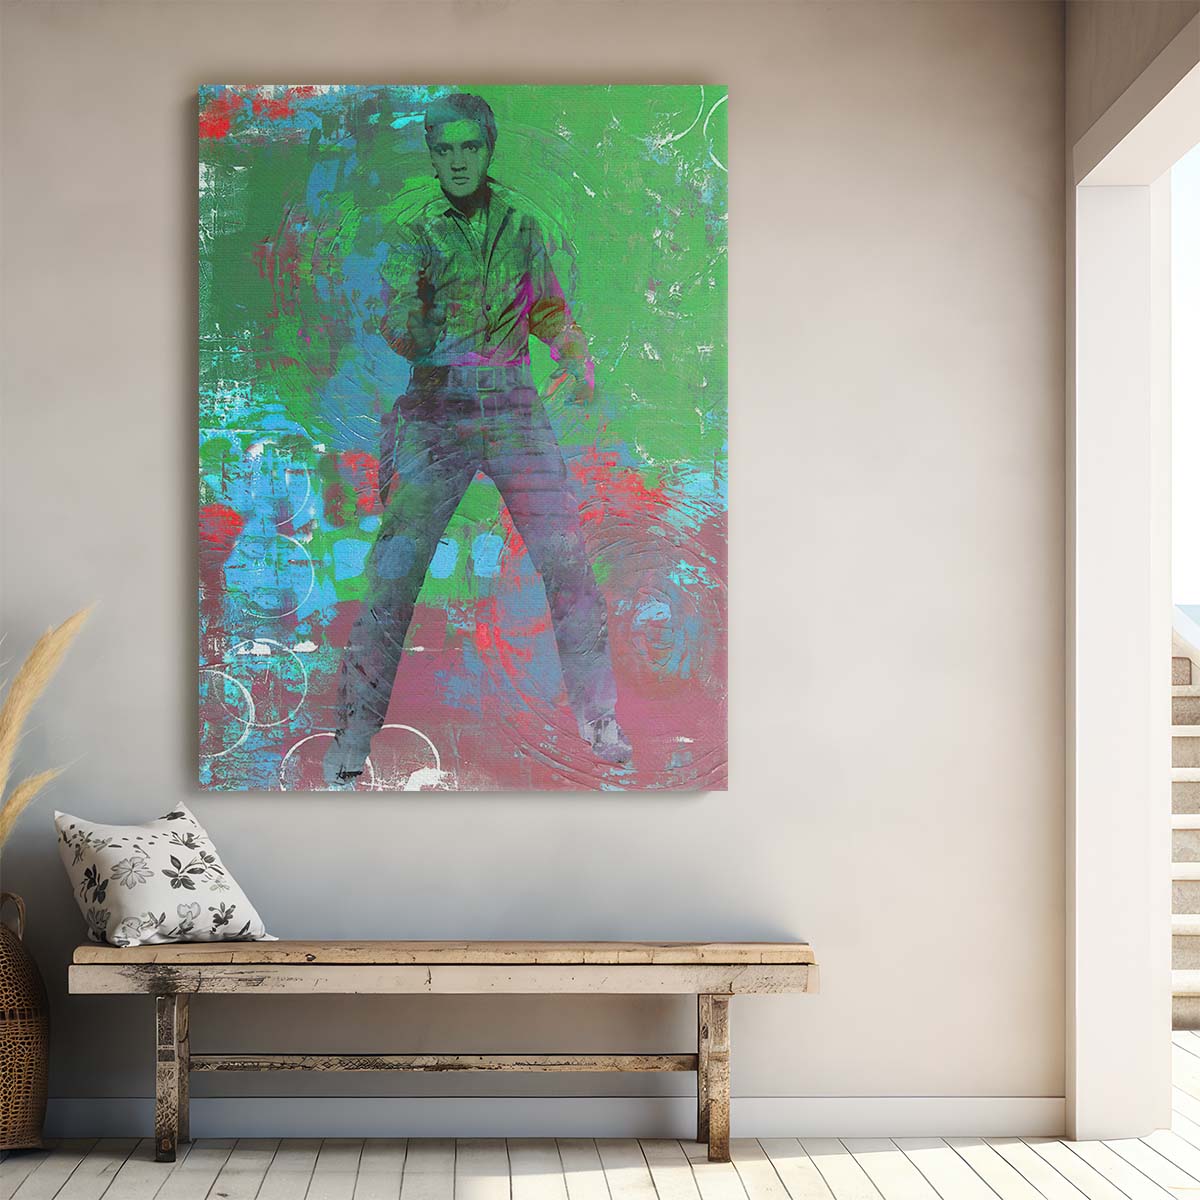 Elvis Presley Circles Green Graffiti Wall Art by Luxuriance Designs. Made in USA.